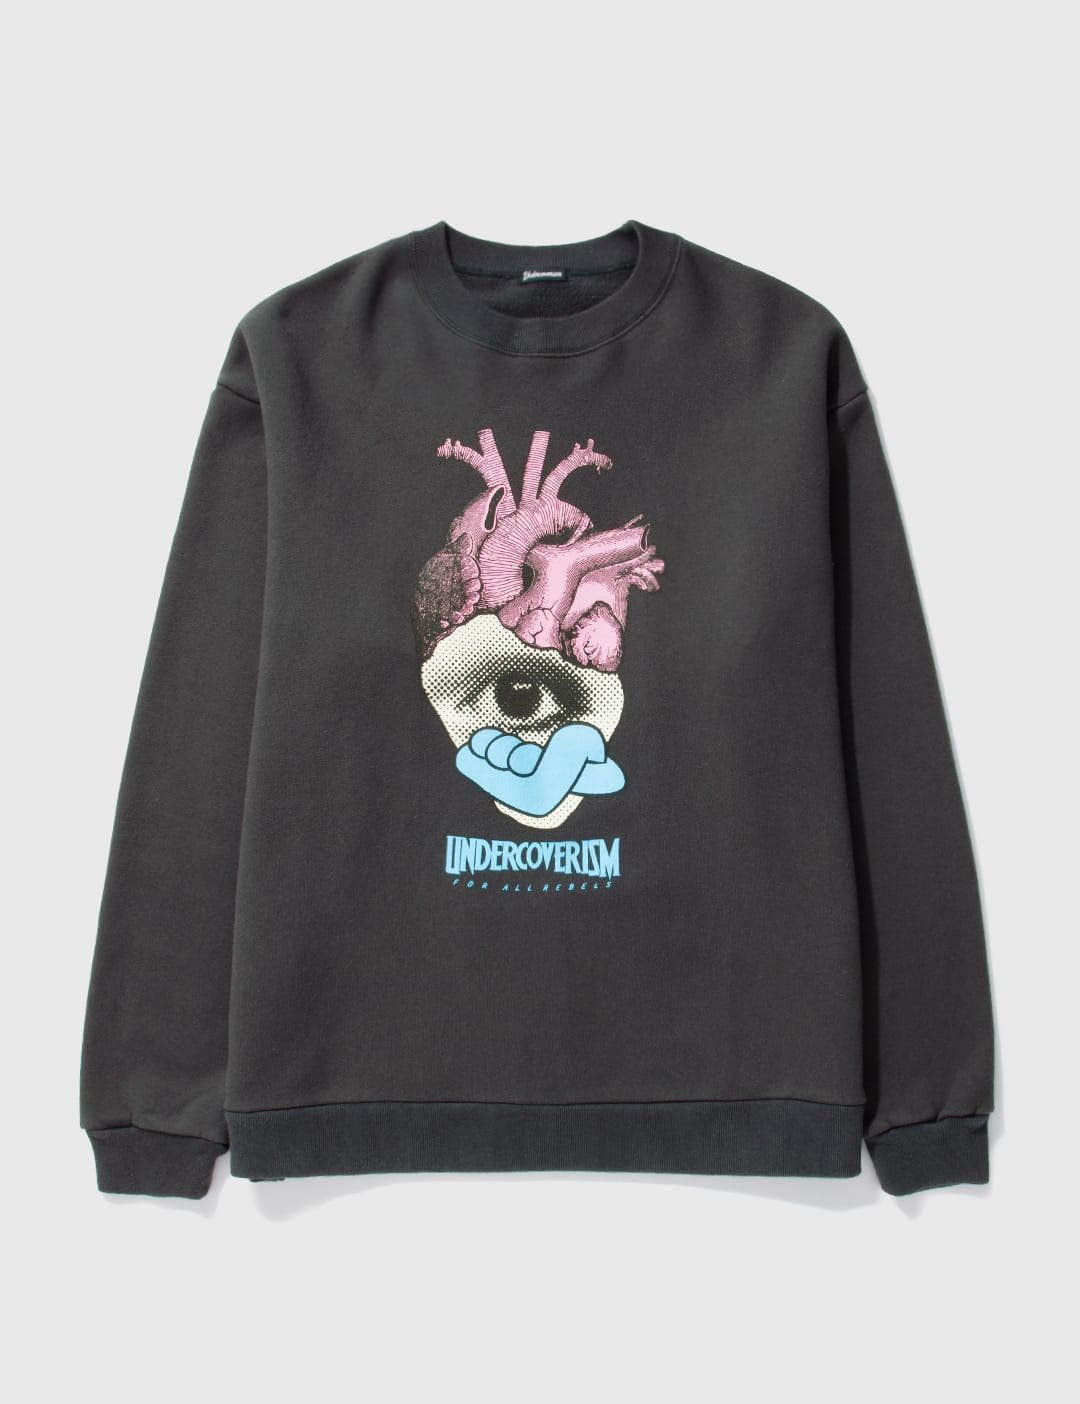 Undercoverism - For All Rebels Sweatshirt | HBX - Globally Curated 